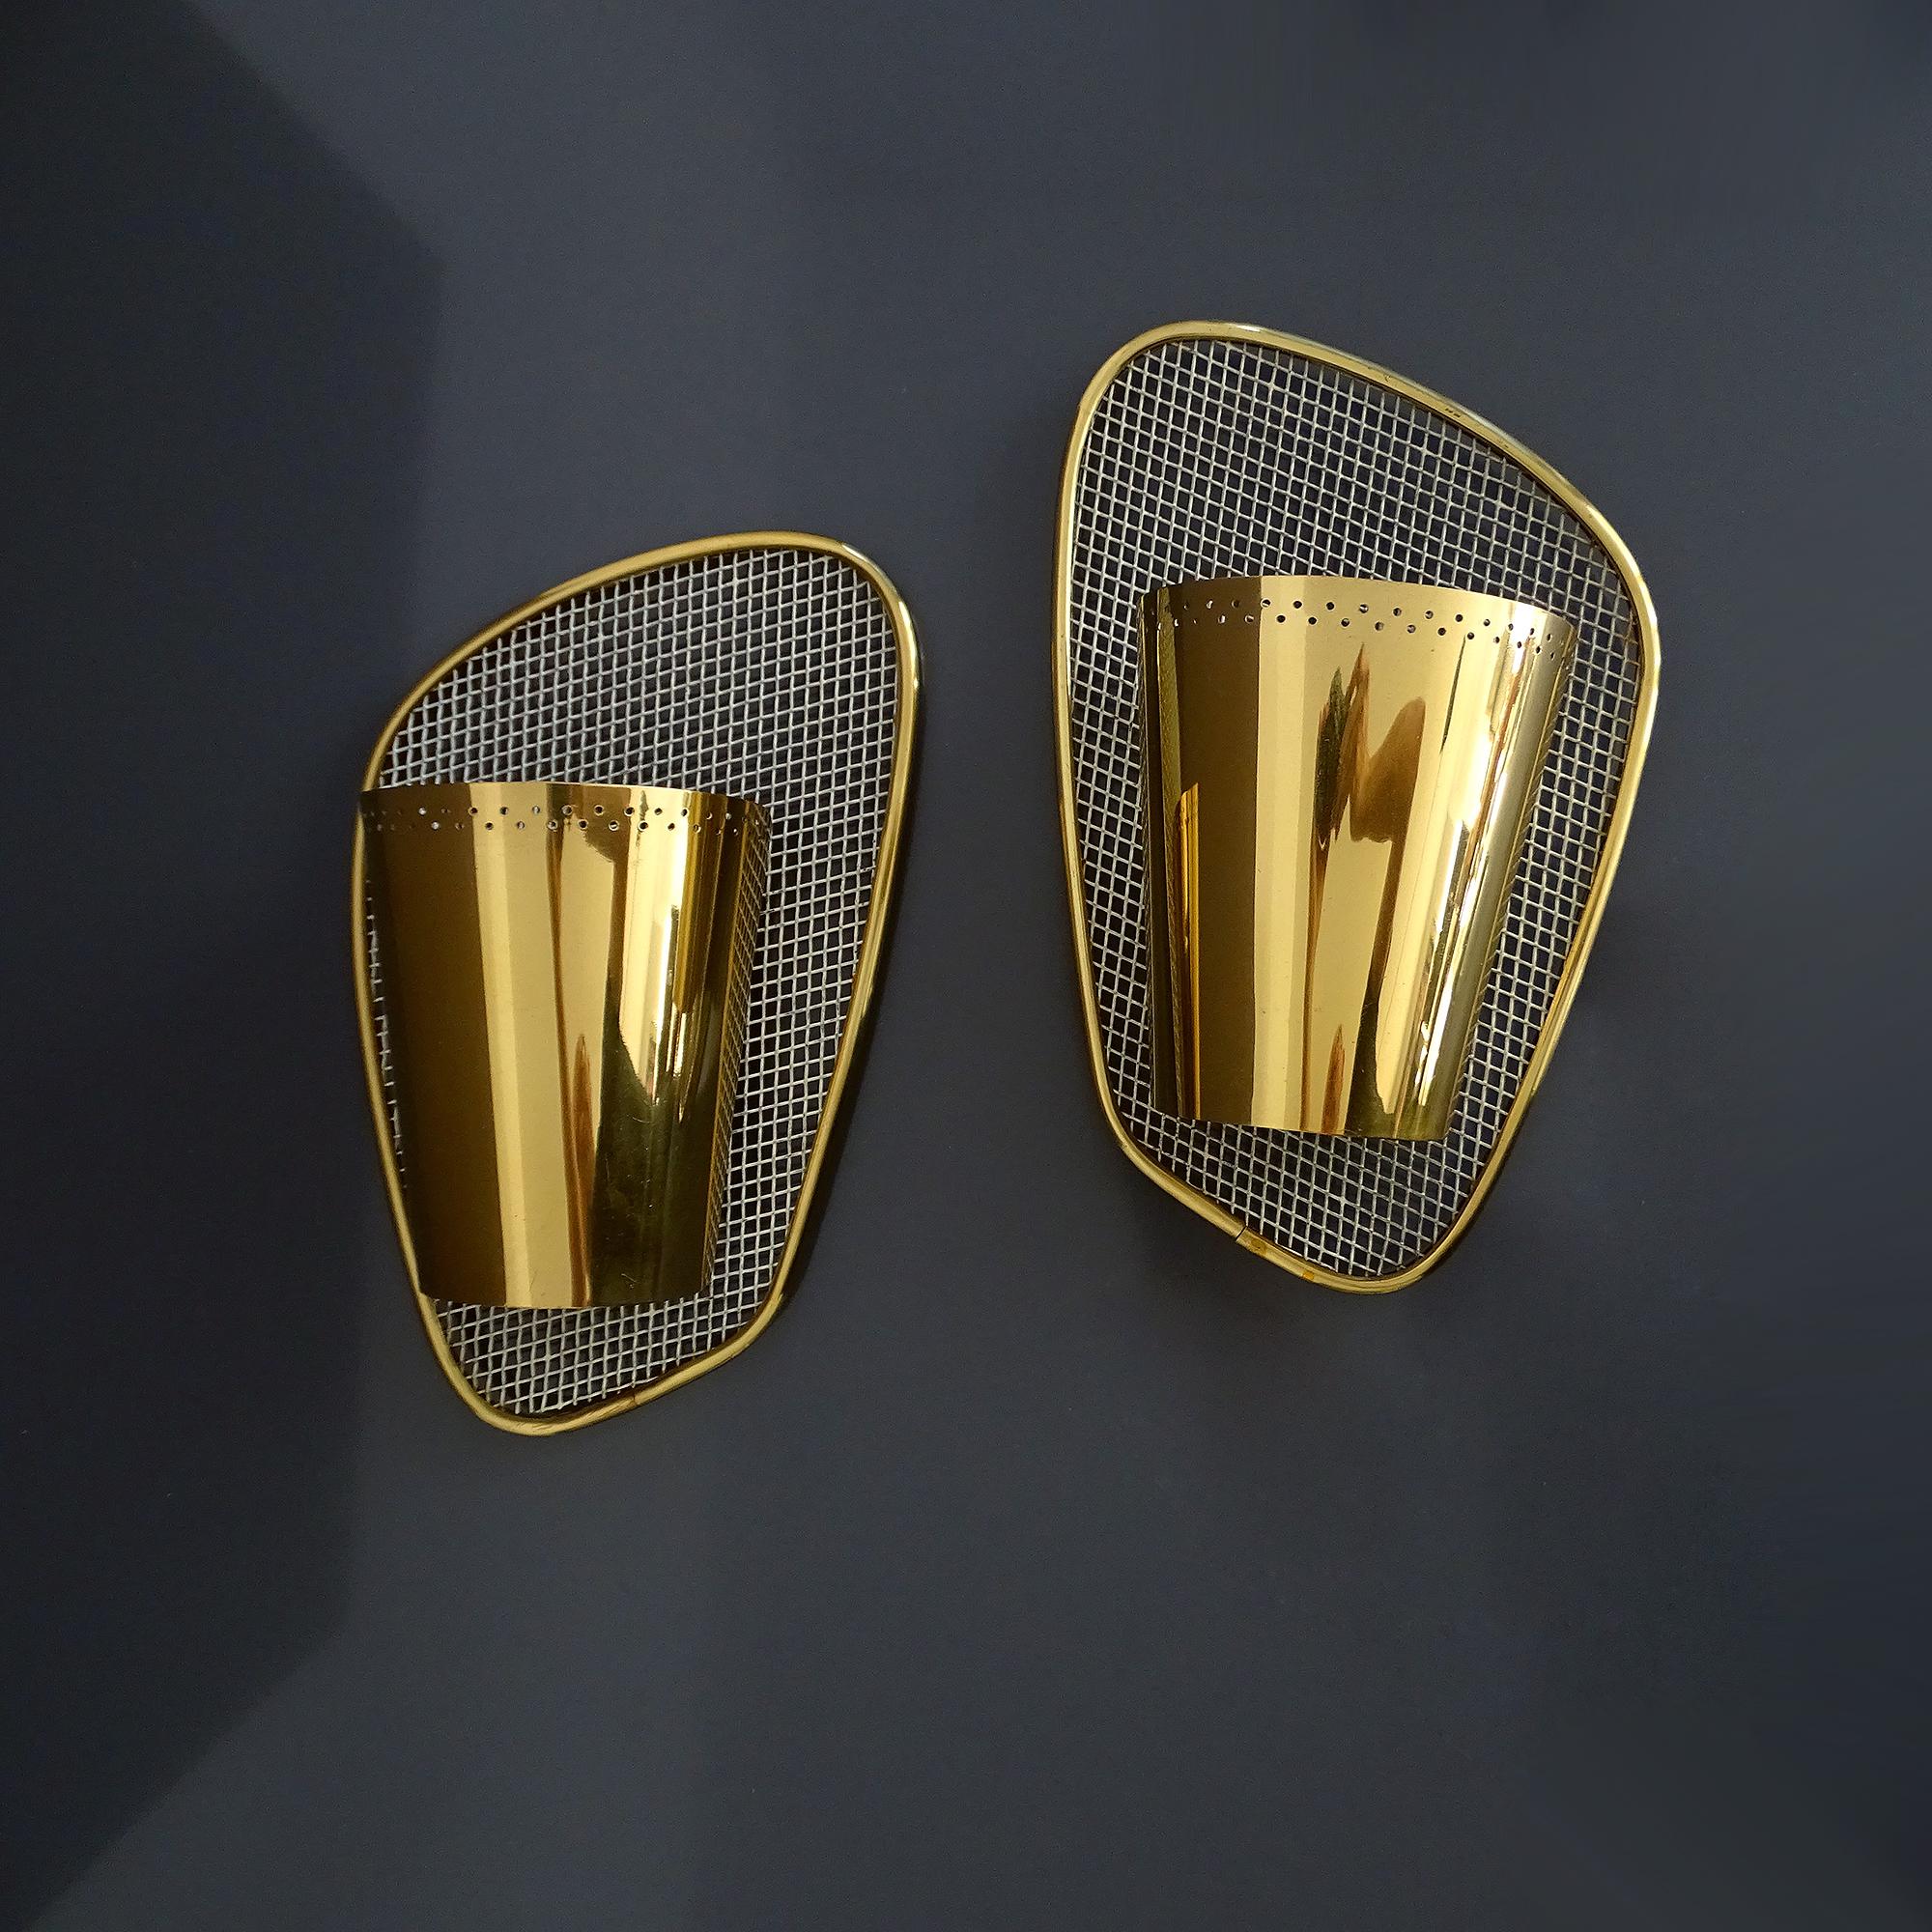 Pair of very stylish midcentury  sconces, featuring a louvered arched brass shade mounted on an white enameled asymmetric grid with brass frame
Measures: H 11.82 in. x W 7.49 in. x D 3.94 in.
H 30 cm x W 19 cm x D 10 cm
One standard bulb each, 60